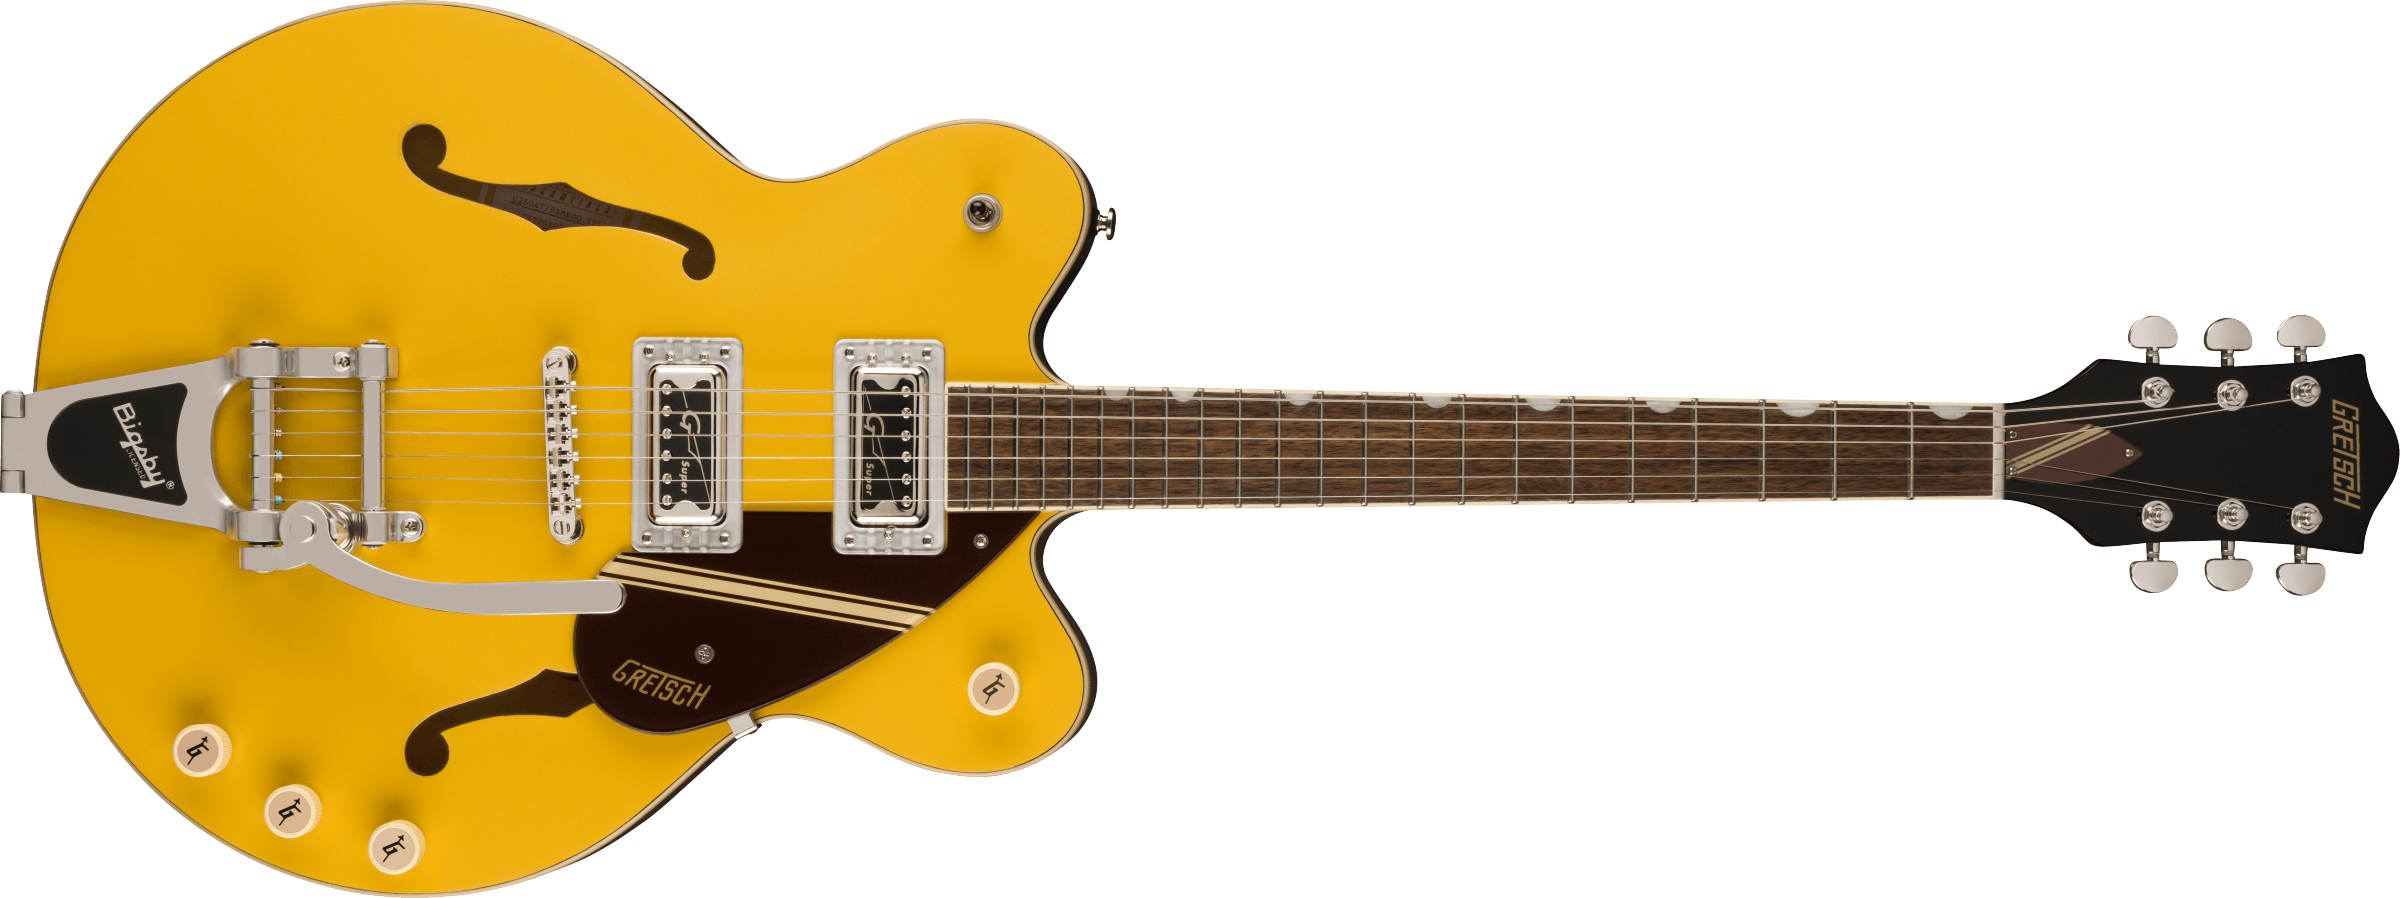 GRETSCH G2604T Limited Edition Streamliner Rally II Center Block with Bigsby Two-Tone Bamboo Yellow/Copper Metallic MODEL 2806104563